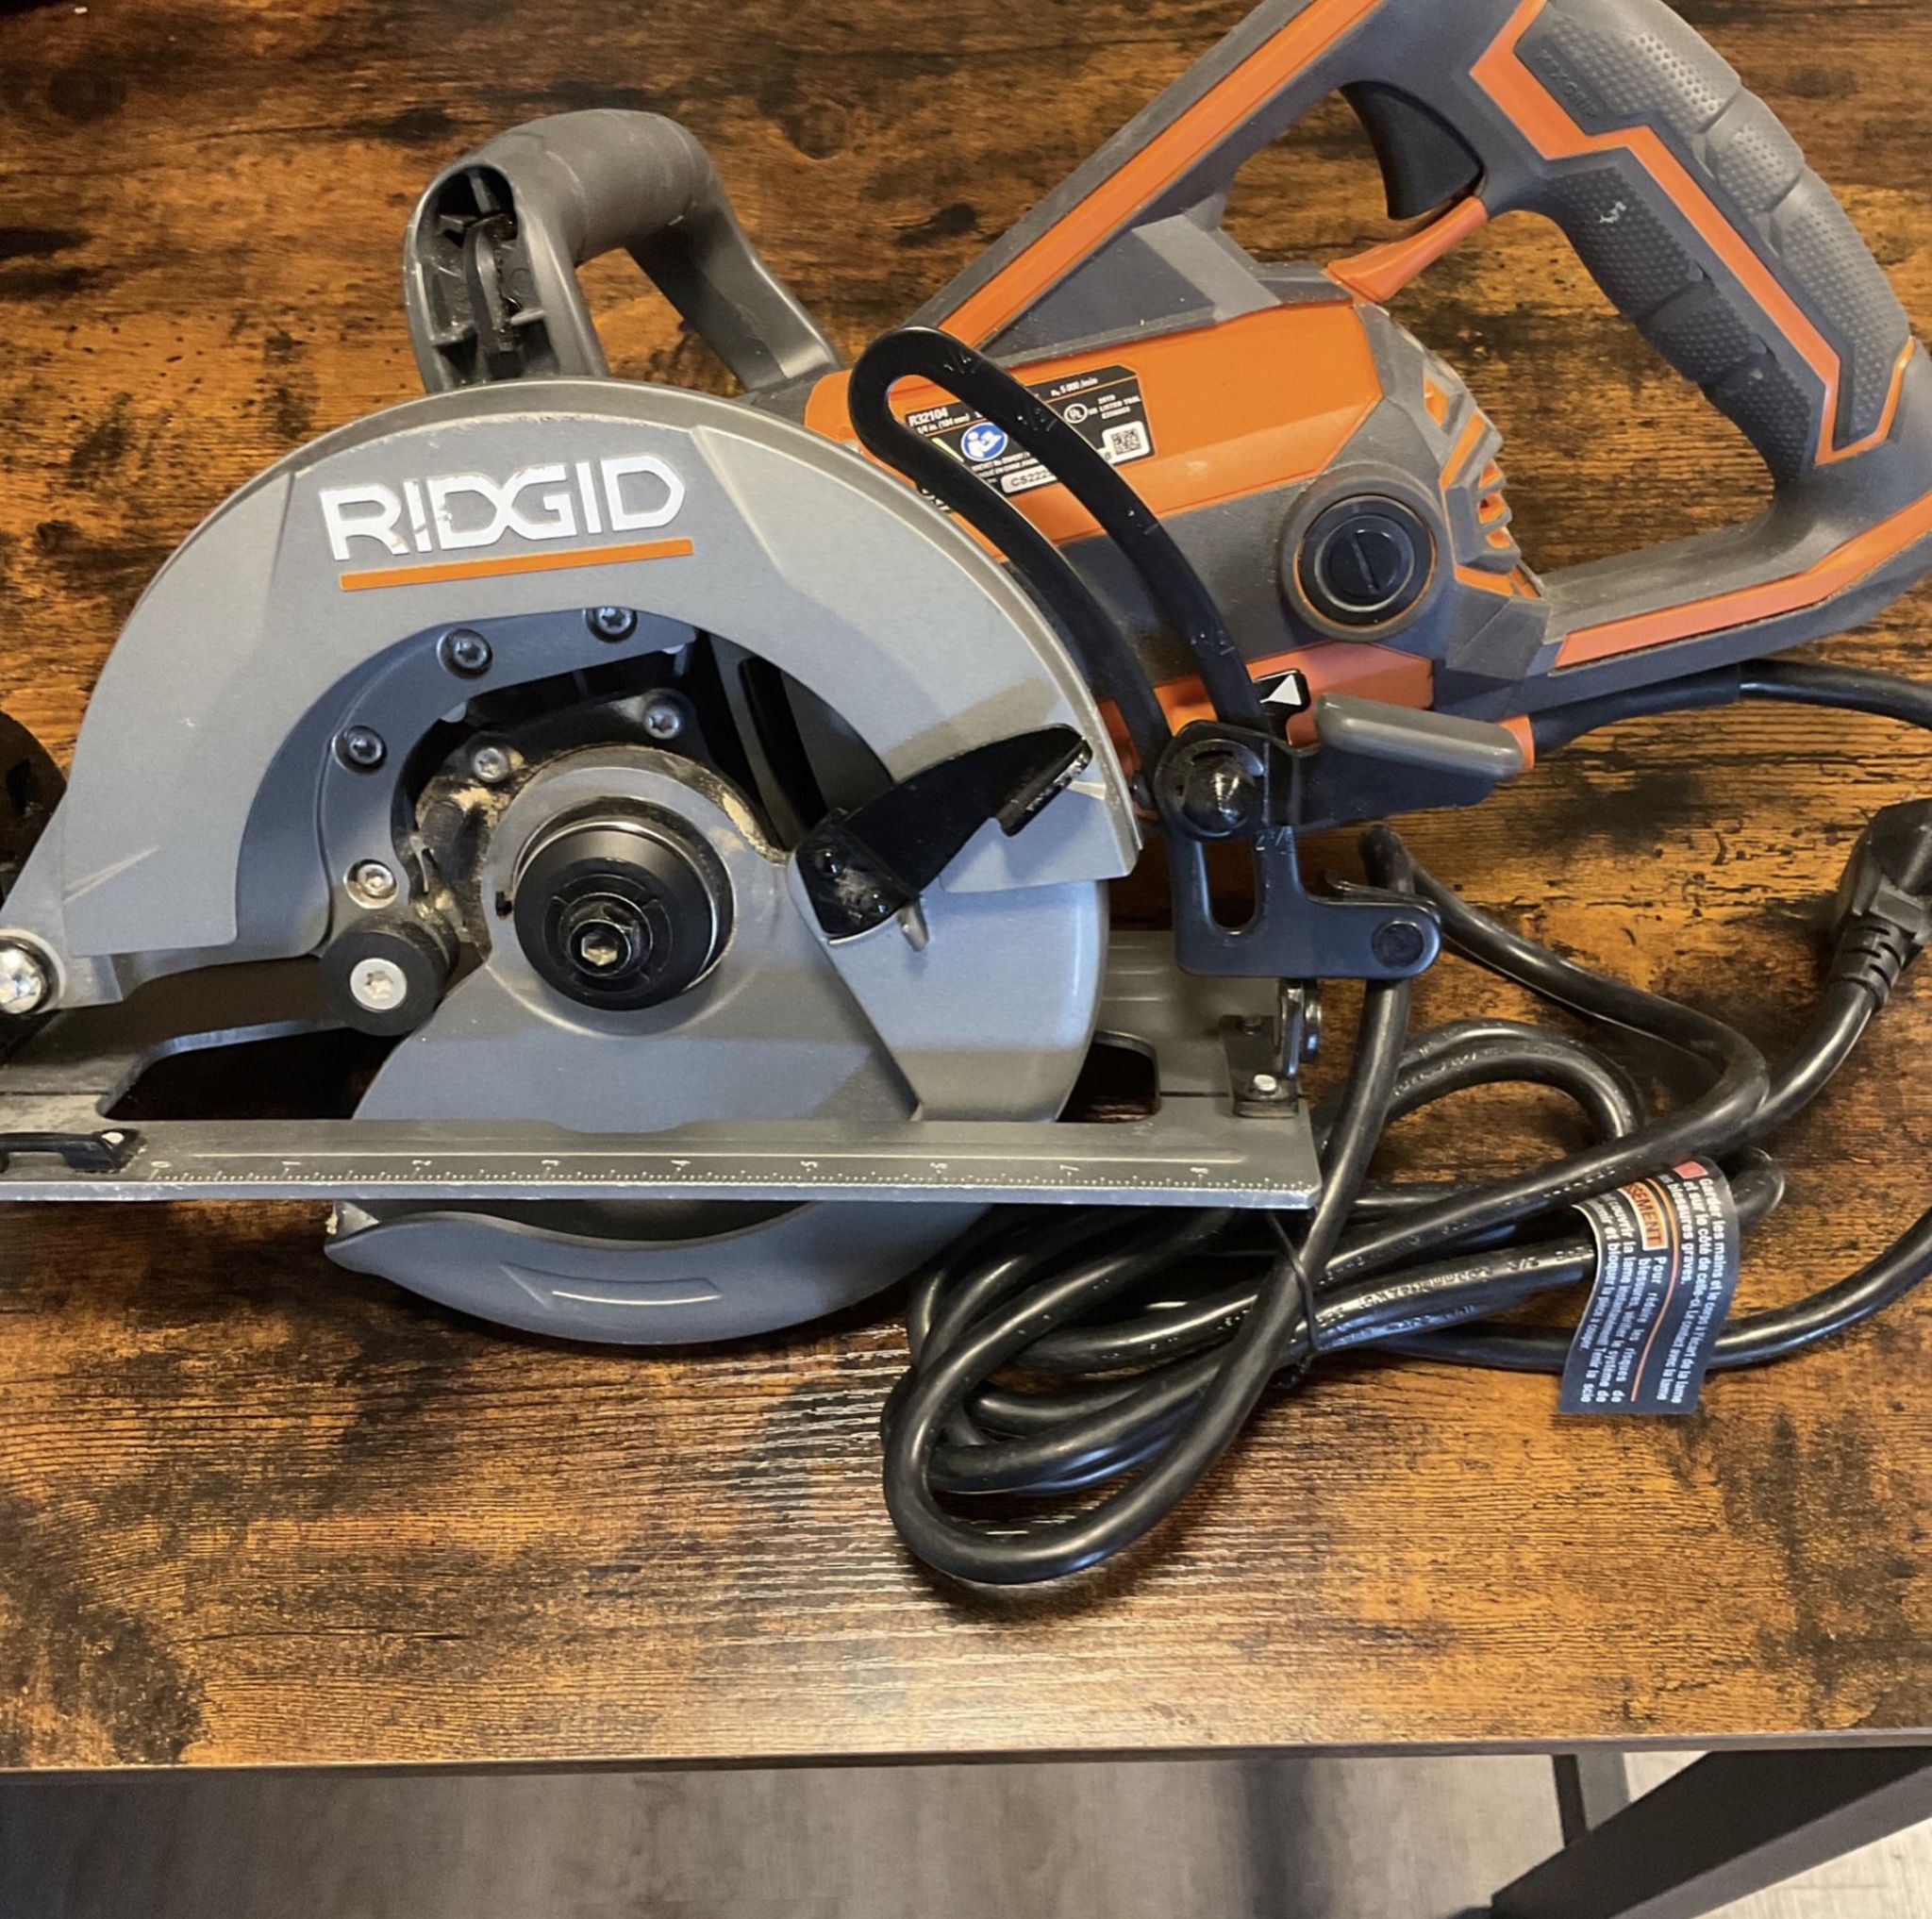 RIDGID THRUCOOL 15 Amp 7-1/4 in. Worm Drive Circular Saw for Sale in  Riverside, CA OfferUp